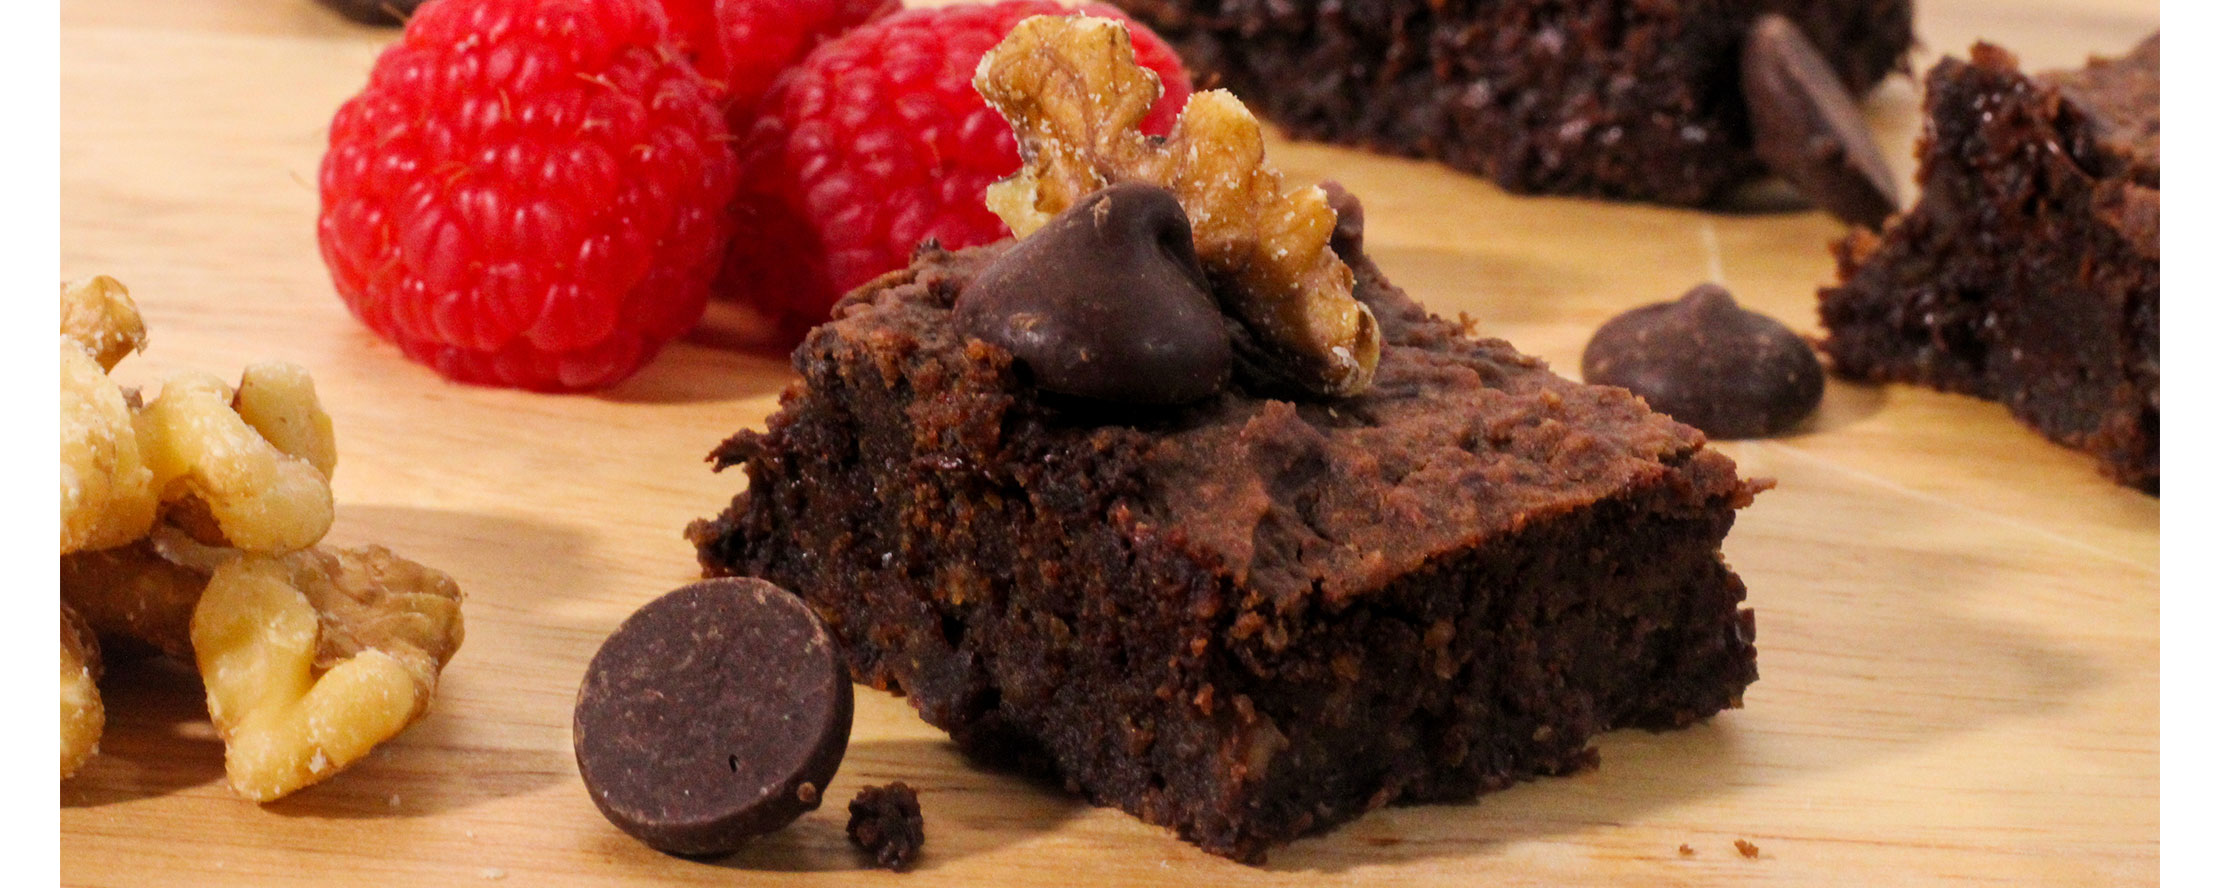 Black bean brownie with walnuts, chocolate chips, and raspberries on the side